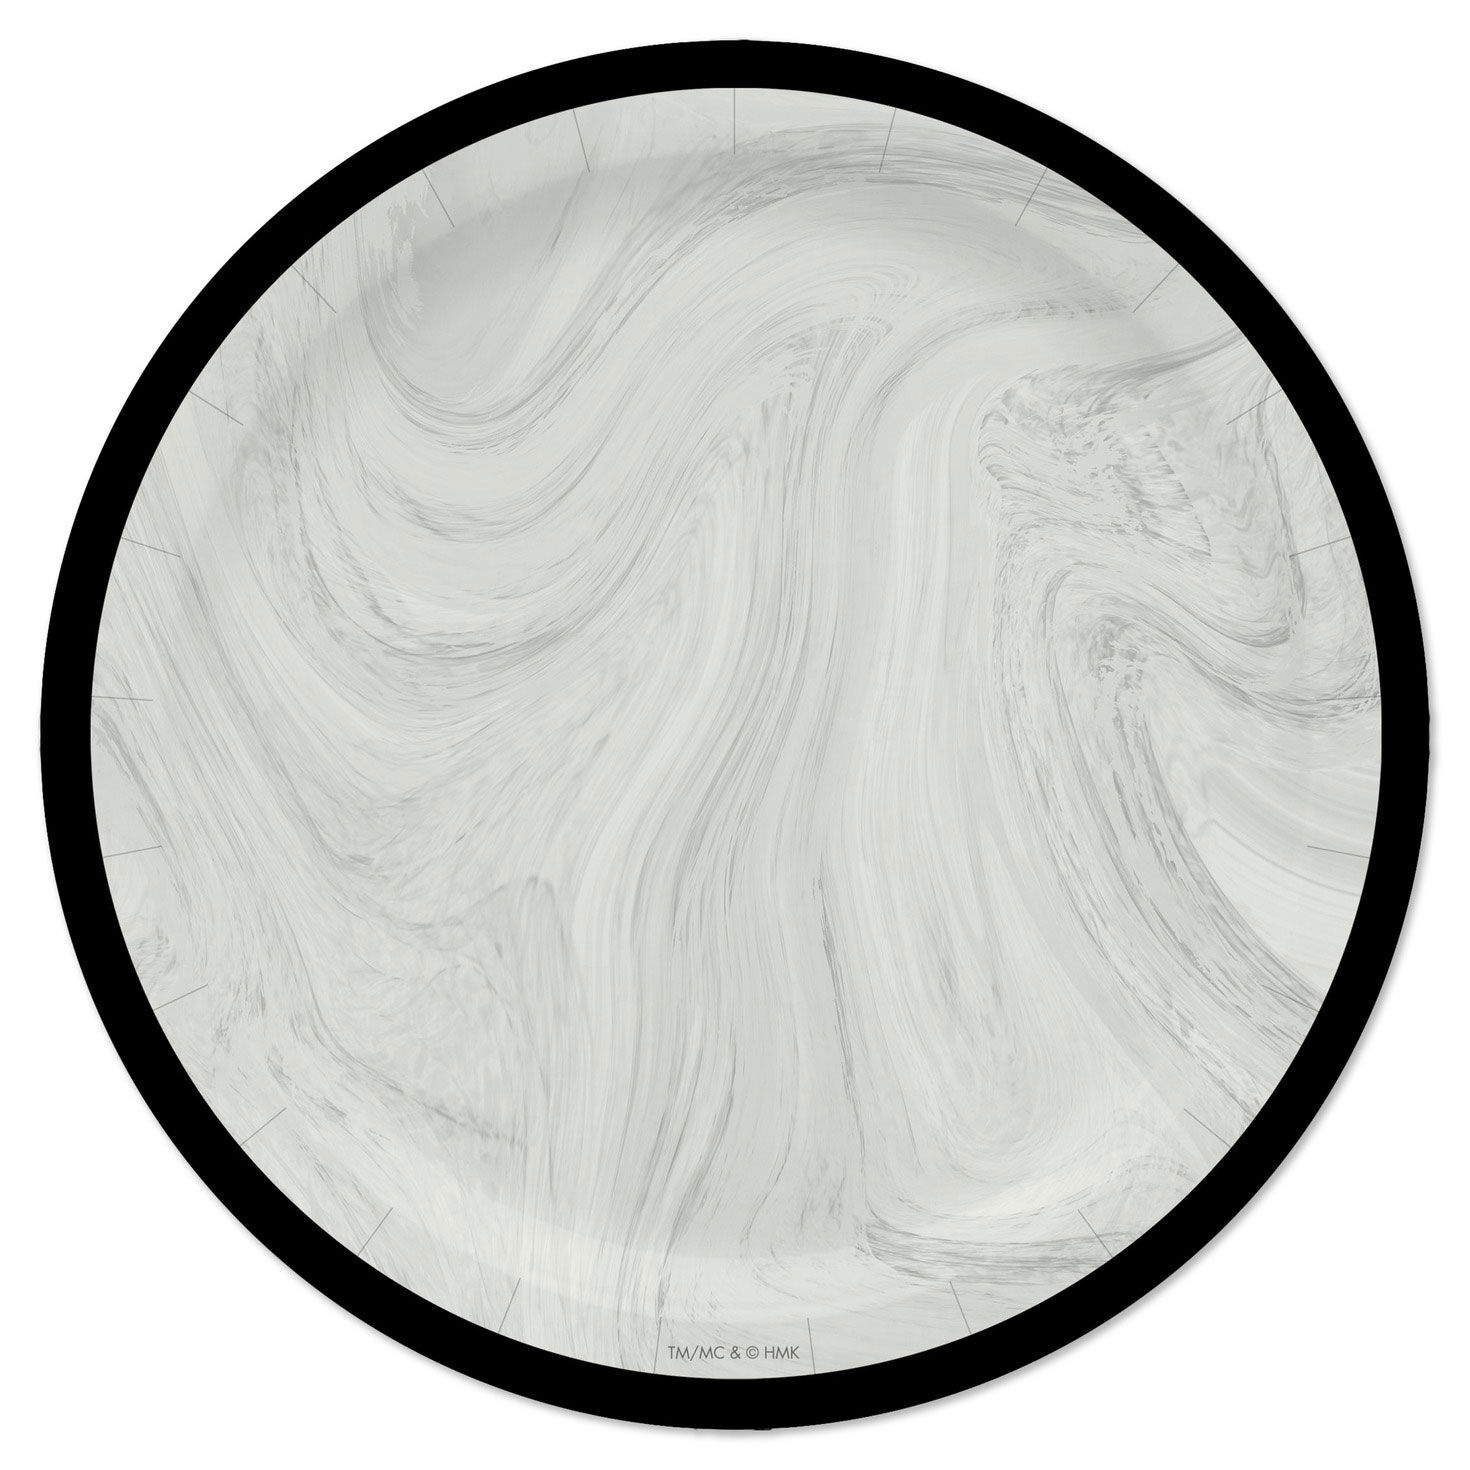 Gray and White Marbled Dessert Plates, Set of 8 for only USD 3.99 | Hallmark